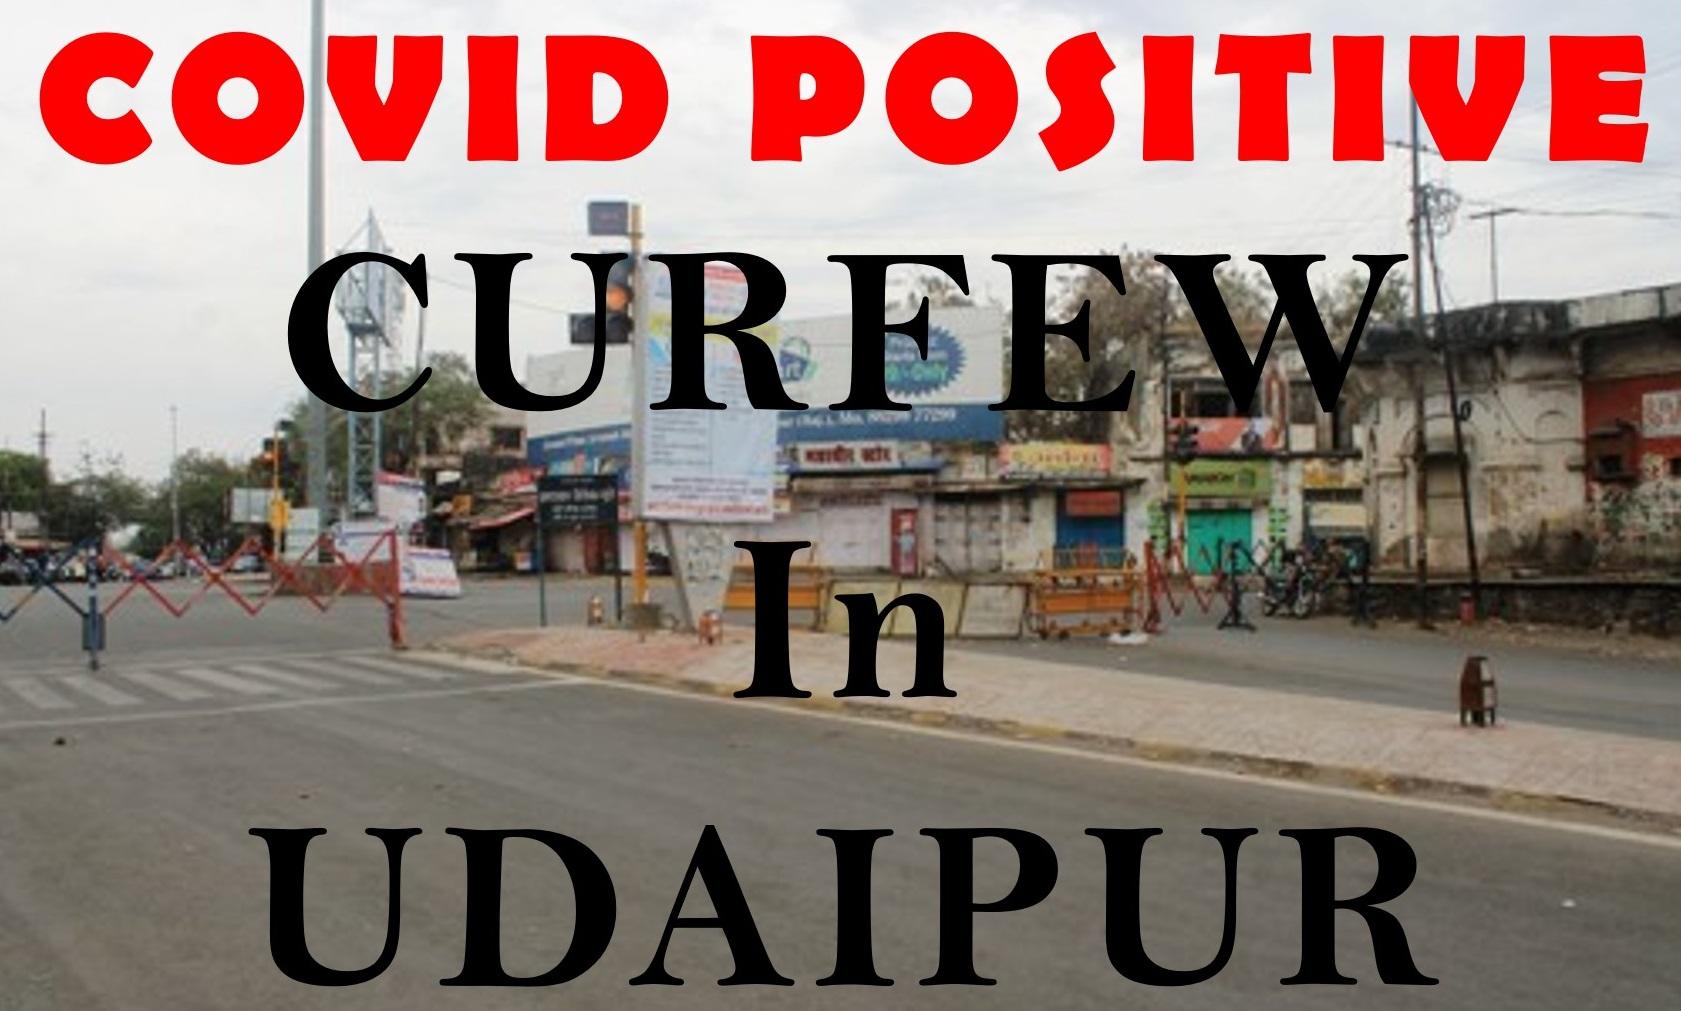 Udaipur is a complete containment zone | BUSINESSES and SHOPS will NOT OPEN - District Collector